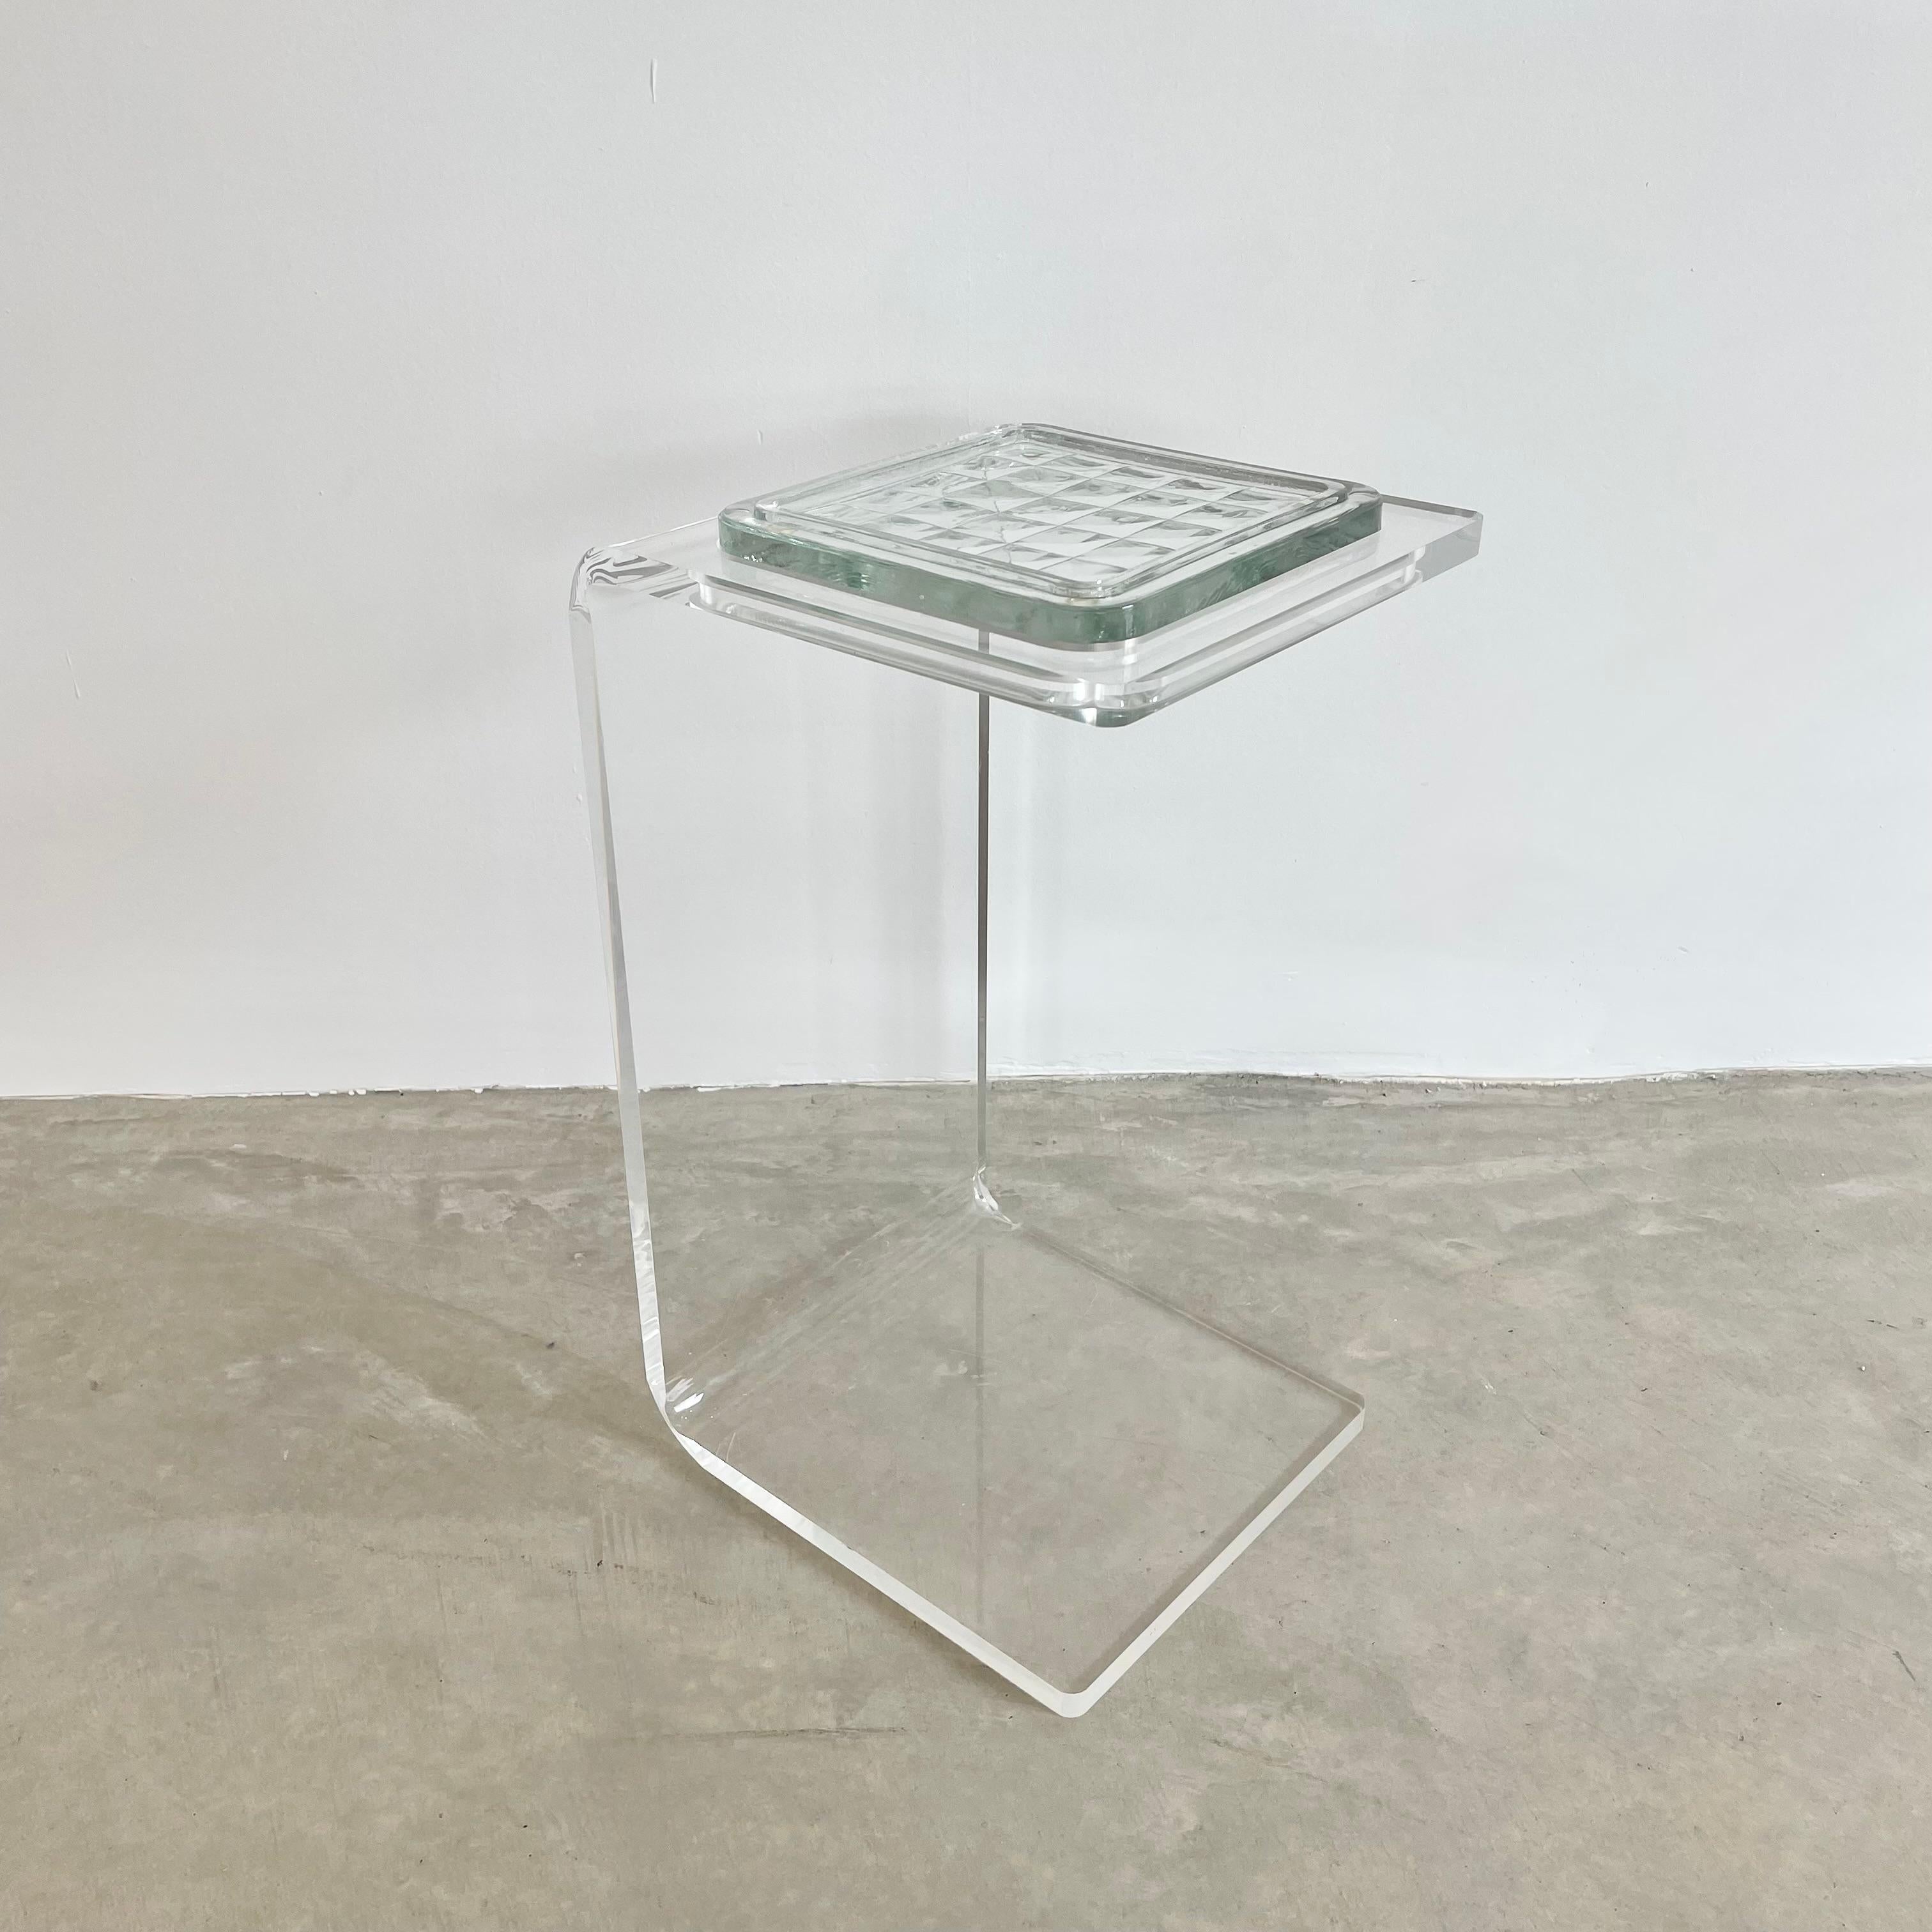 C-shaped lucite end/side table with removable glass tile marked ‘Made in W Germany’, circa 1990. A gorgeous, subtle and multifunctional accent piece that would work seamlessly in any room as side table, catchall, drink table or even as a nightstand.